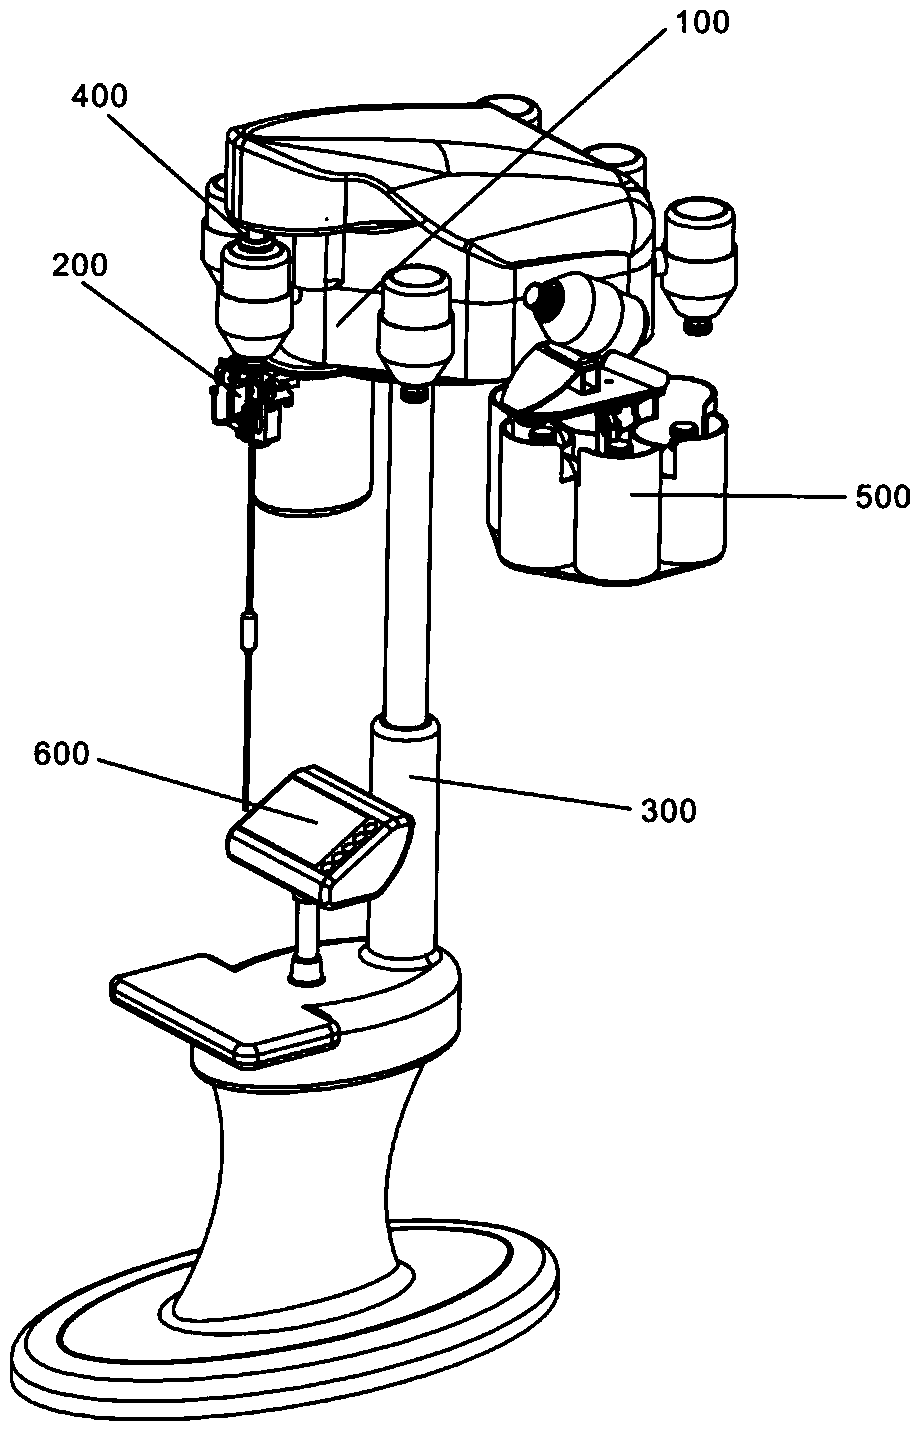 A bottle-pressed automatic transfusion recovery system